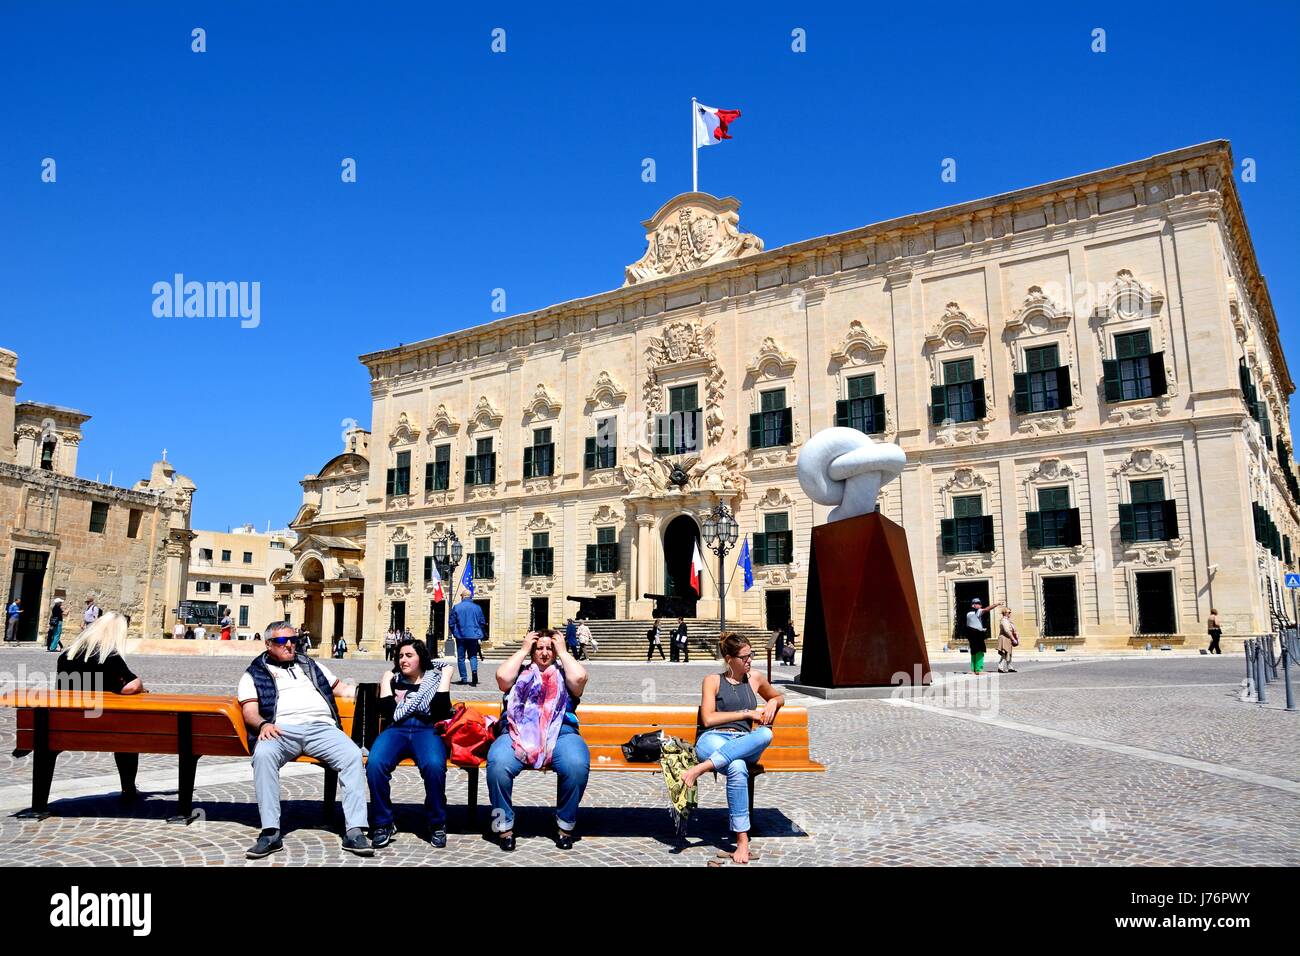 View of the Auberge de Castille in Castille Square with the Bianco Carrara marble sculpture and tourists sitting on a bench in the foreground, Vallett Stock Photo